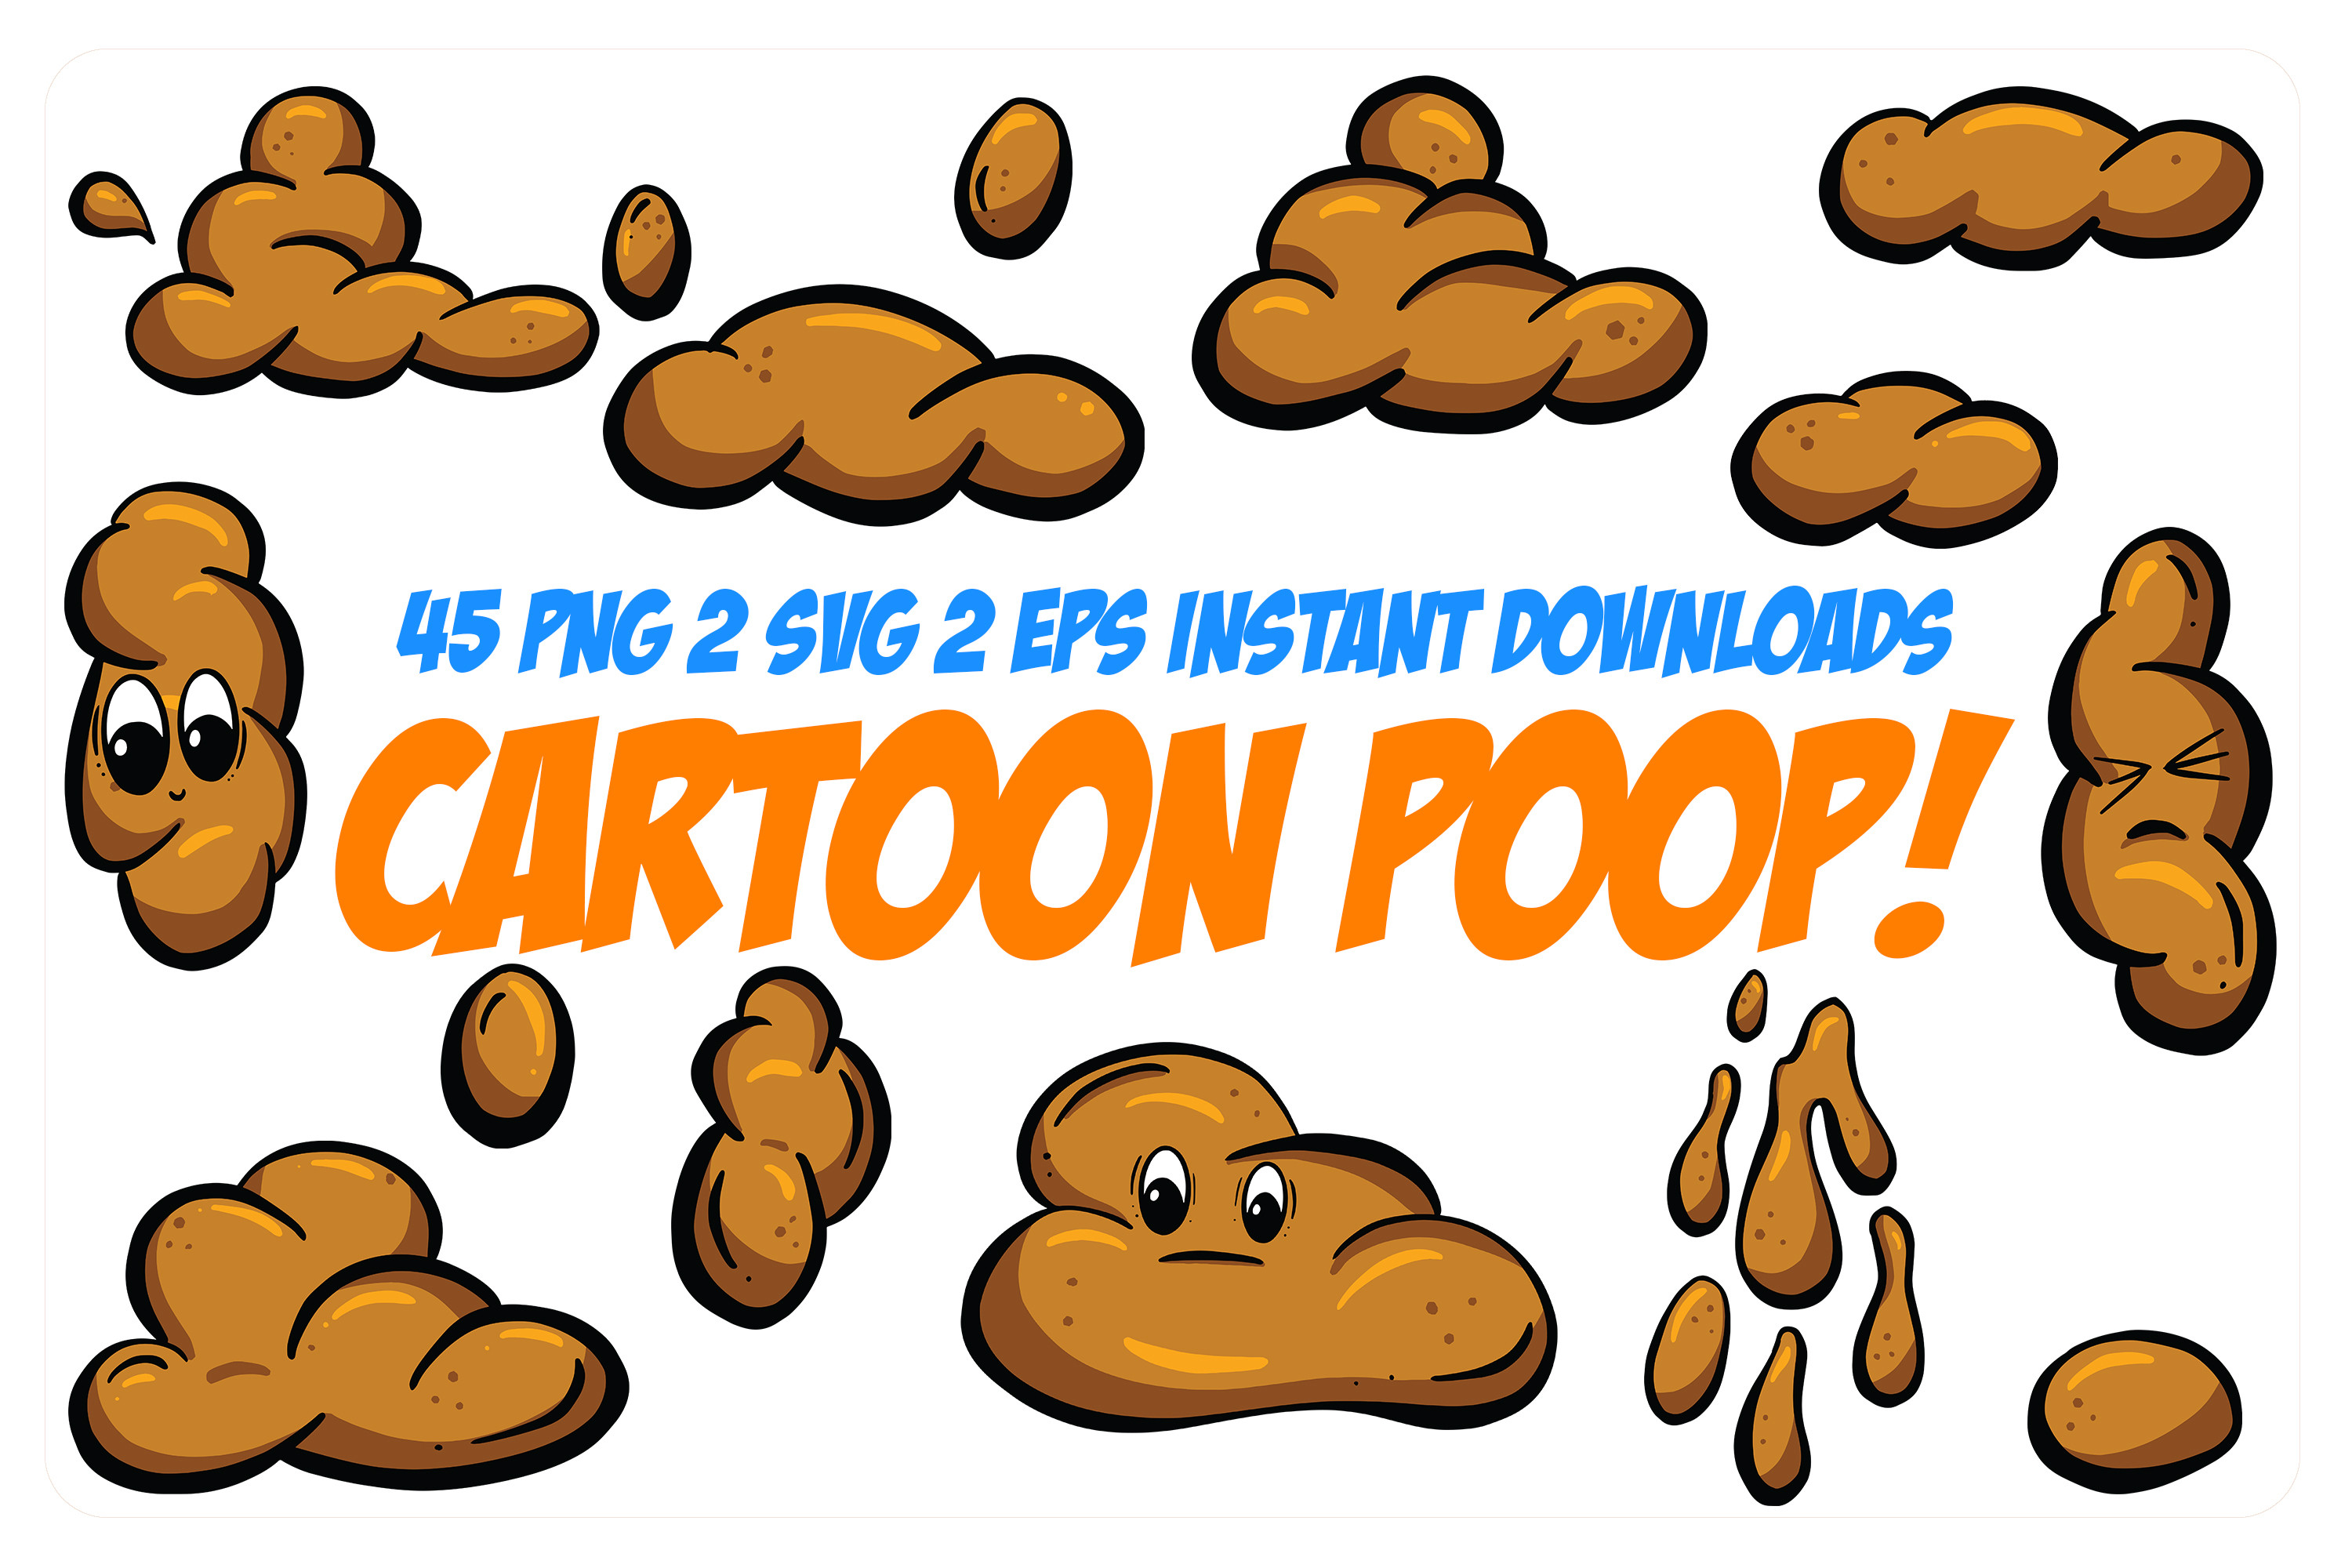 Cartoon Poo Poop Dookie And Turds Svg Graphic By Squeebcreative